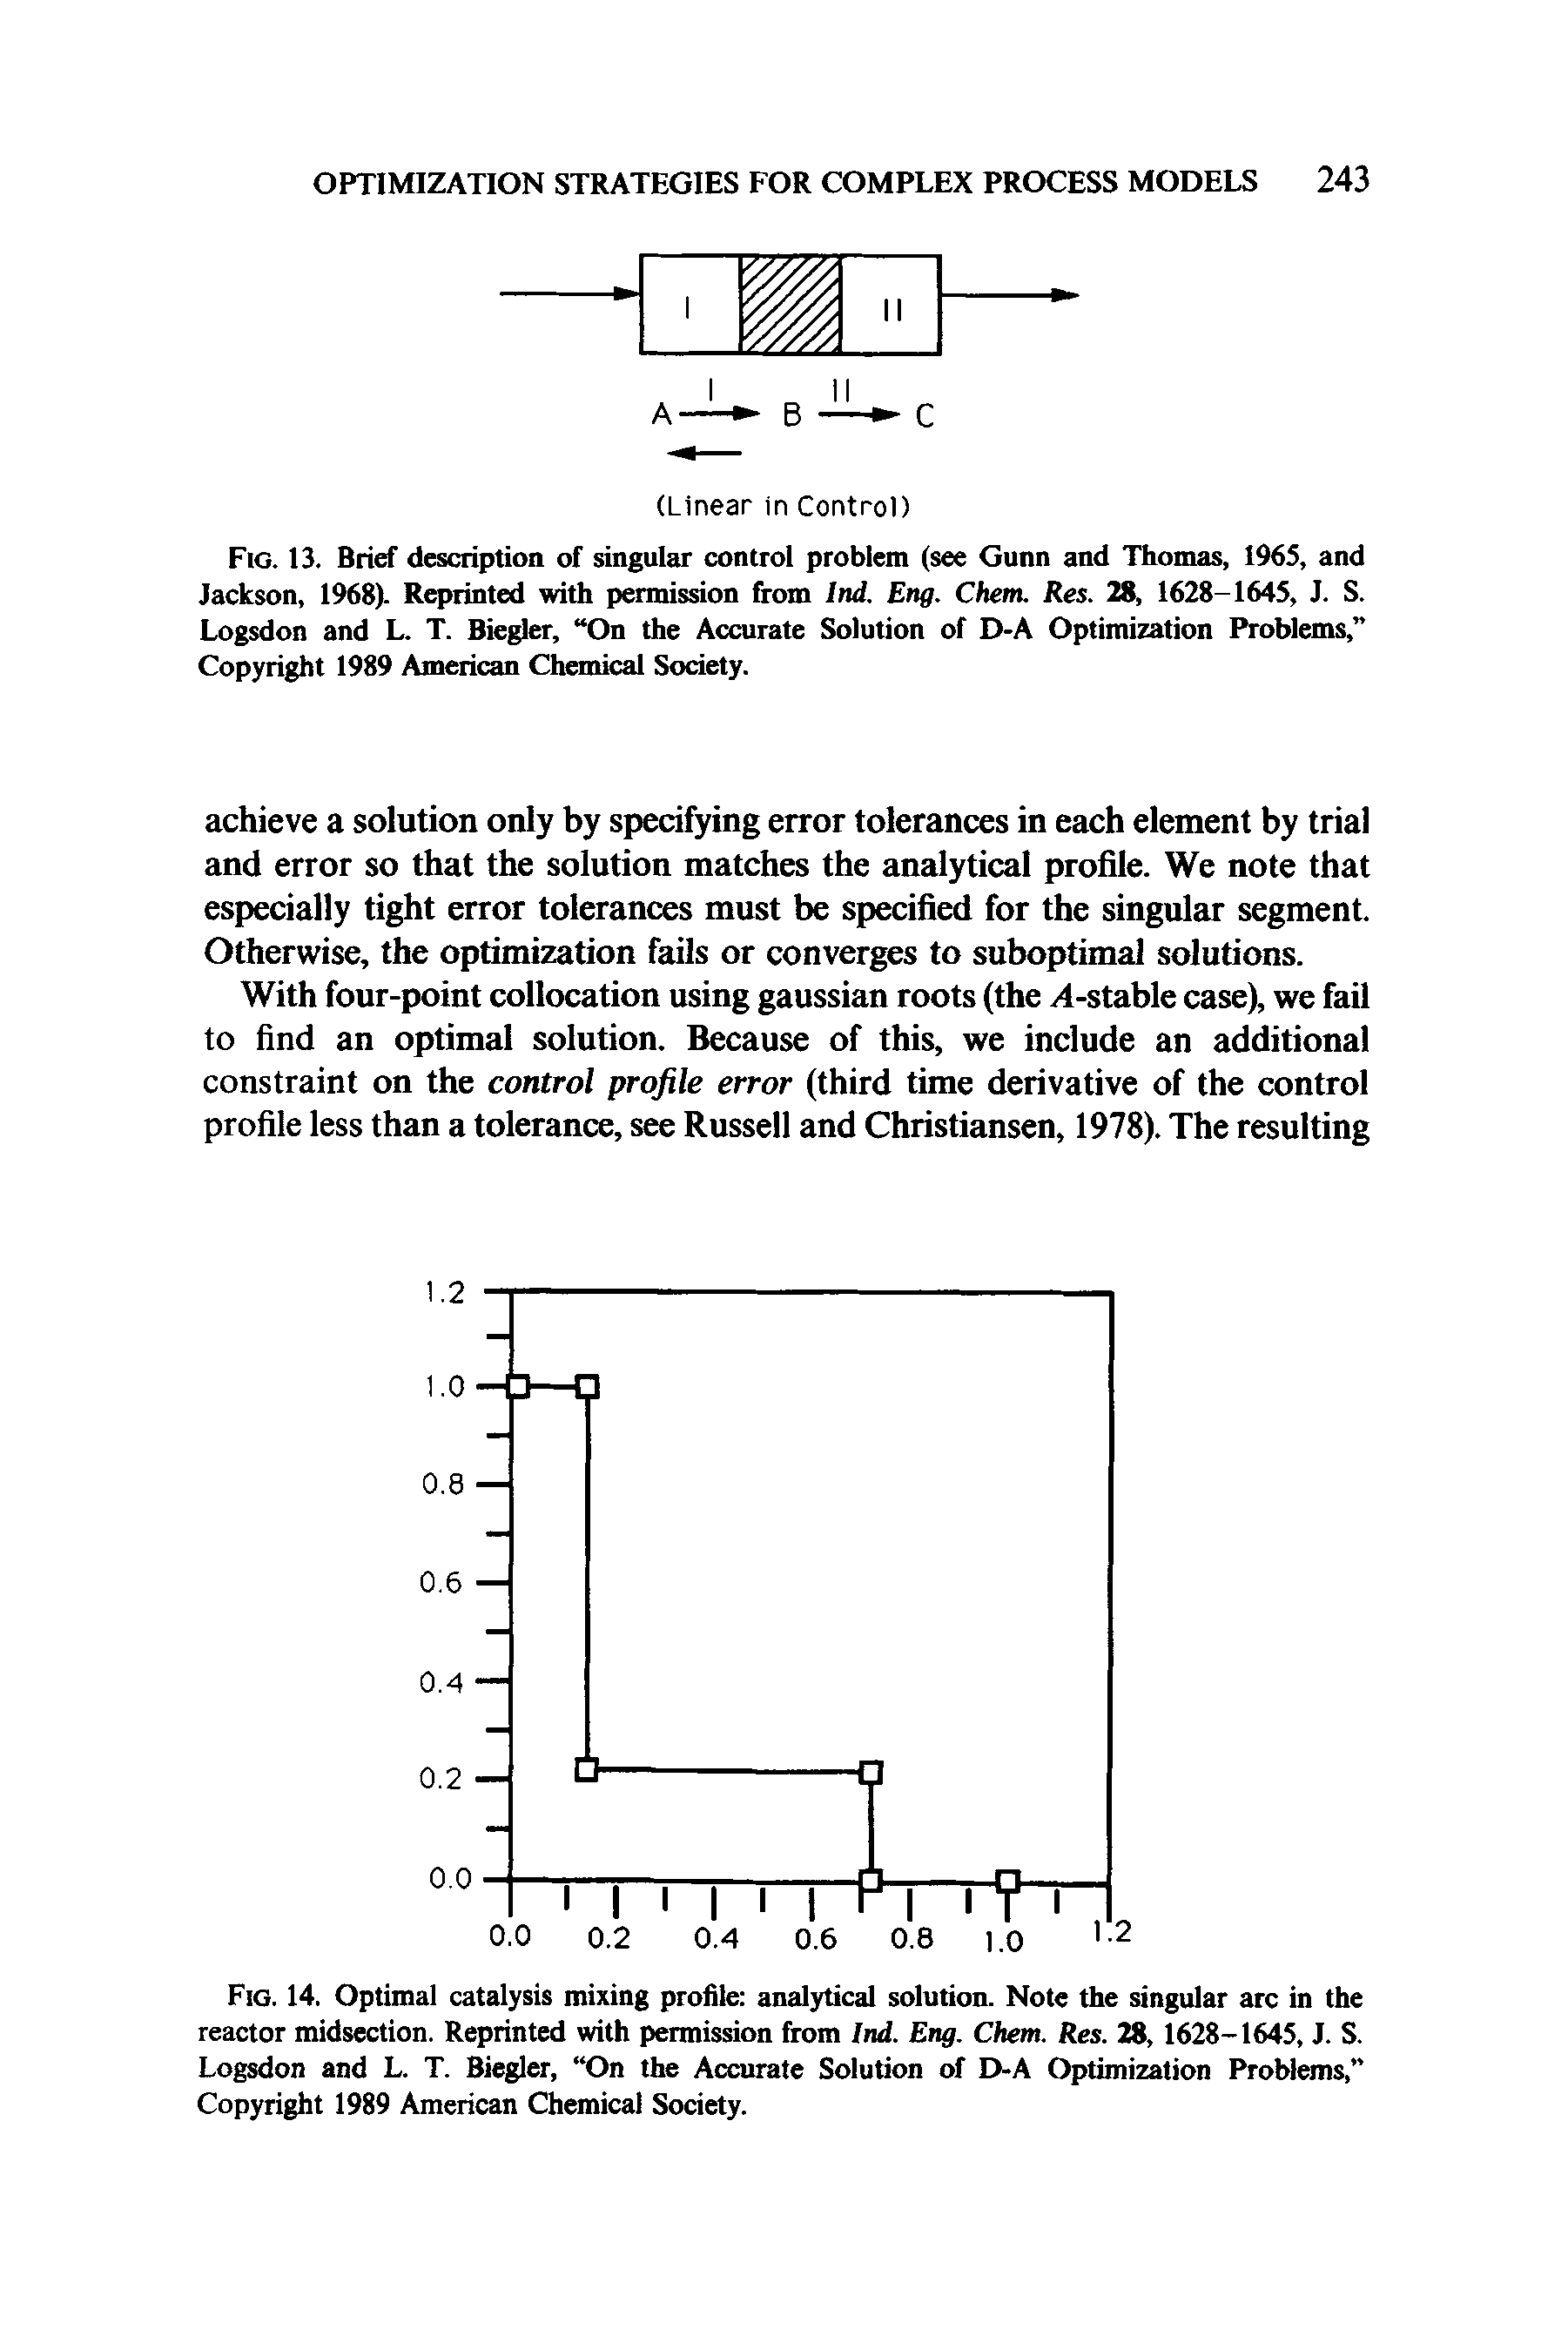 Fig. 14. Optimal catalysis mixing profile analytical solution. Note the singular arc in the reactor midsection. Reprinted with permission from nd. Eng. Chem. Res. 28, 1628-1645, J. S. Logsdon and L. T. Biegler, On the Accurate Solution of D-A Optimization Problems, Copyright 1989 American Chemical Society.